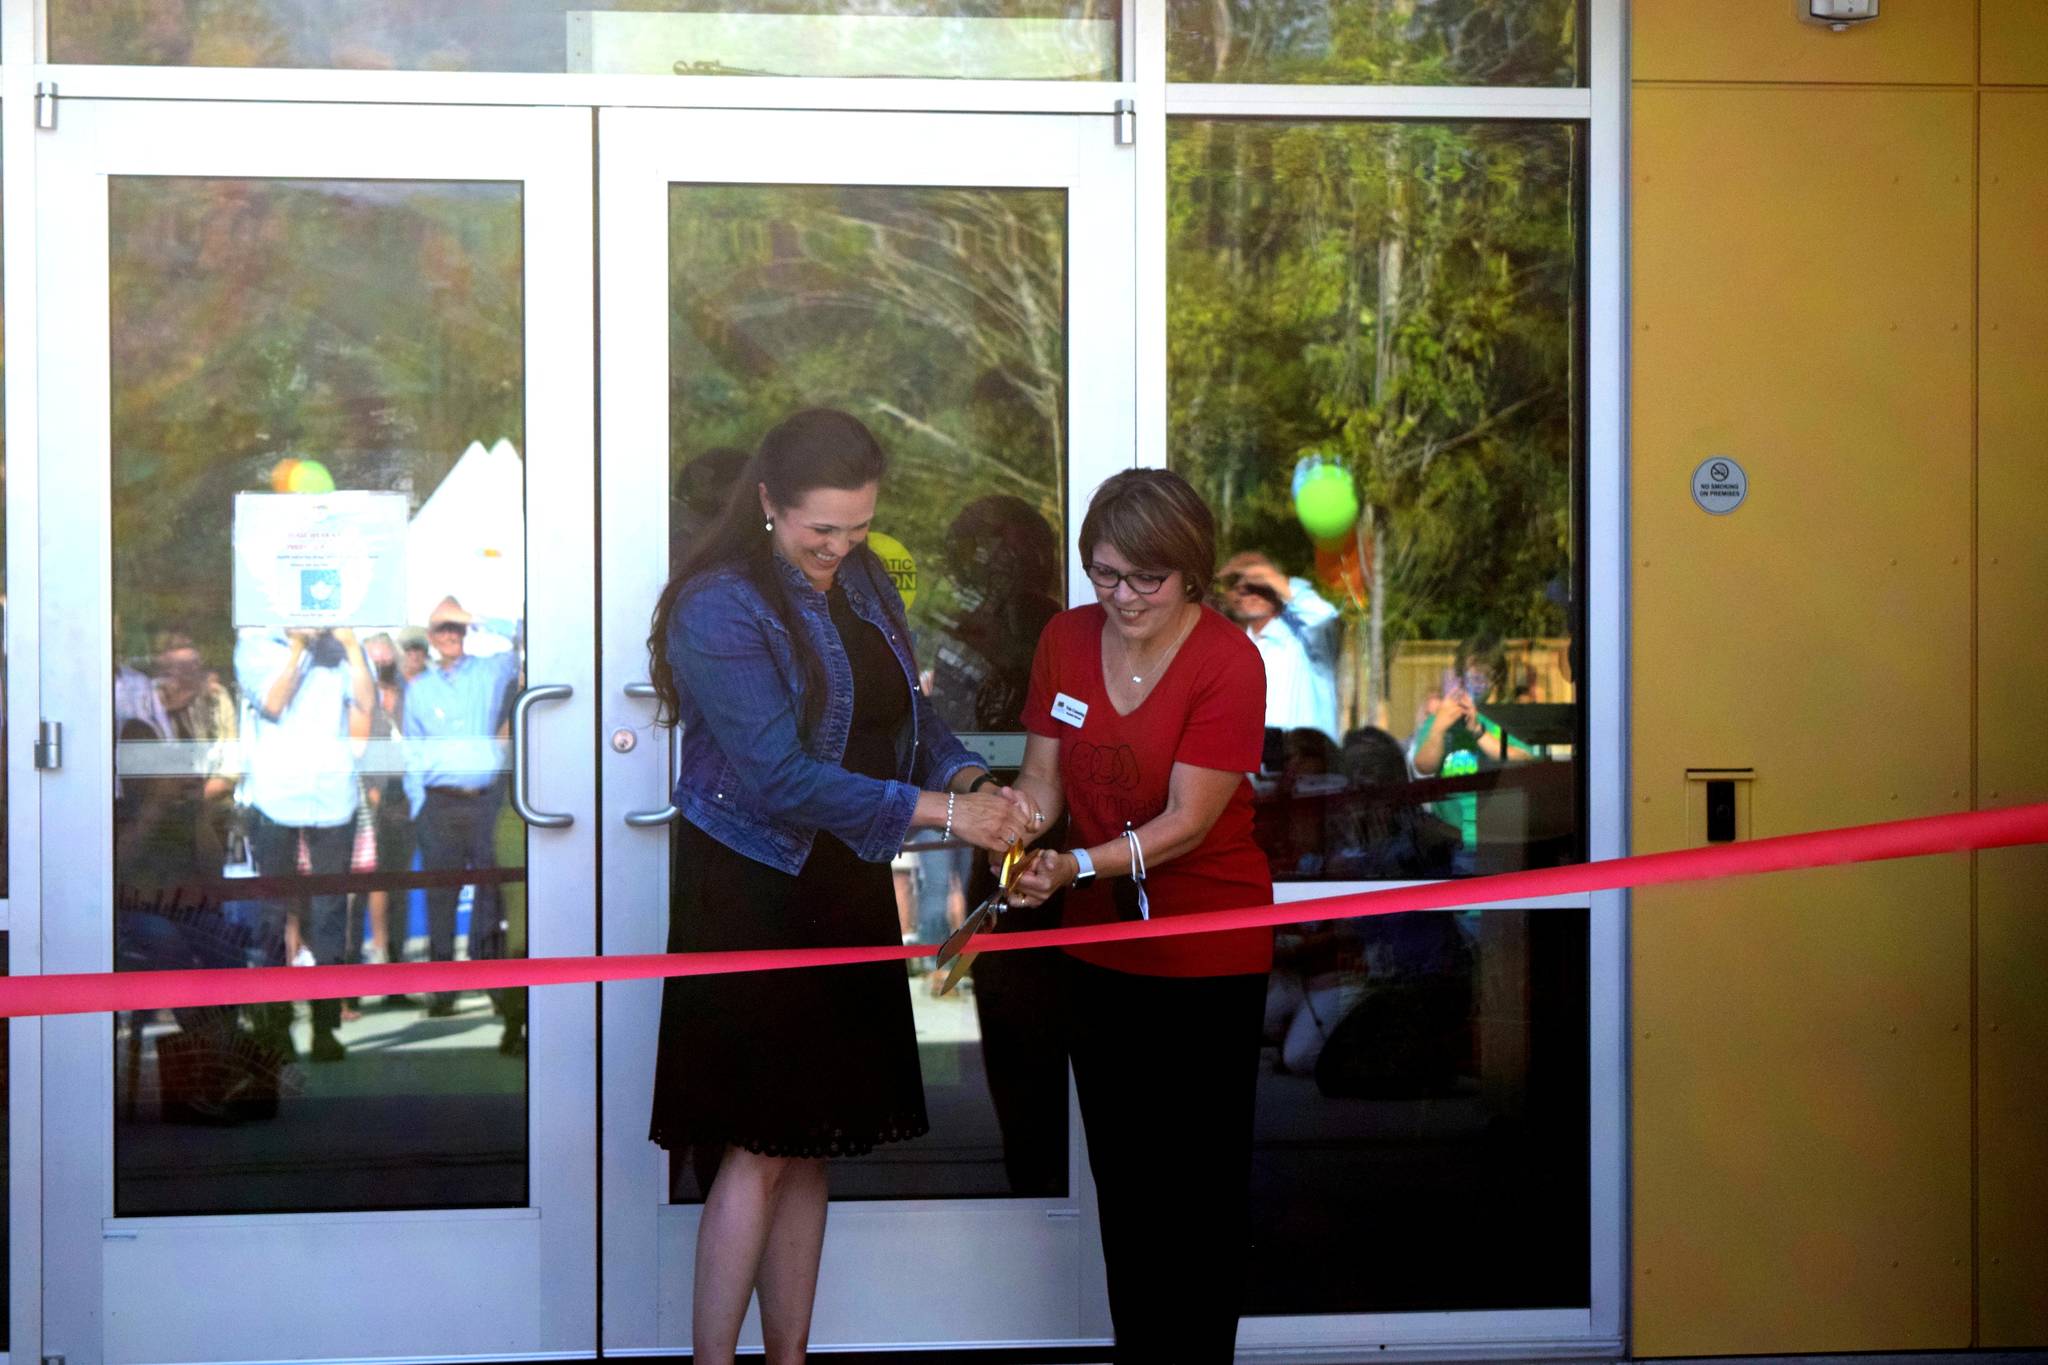 Rebekah McHugh and Encompass Executive Director Nela Cumming cut the ribbon at the Child Development Center’s grand opening on Aug. 19. Photo by Conor Wilson/Snoqualmie Valley Record